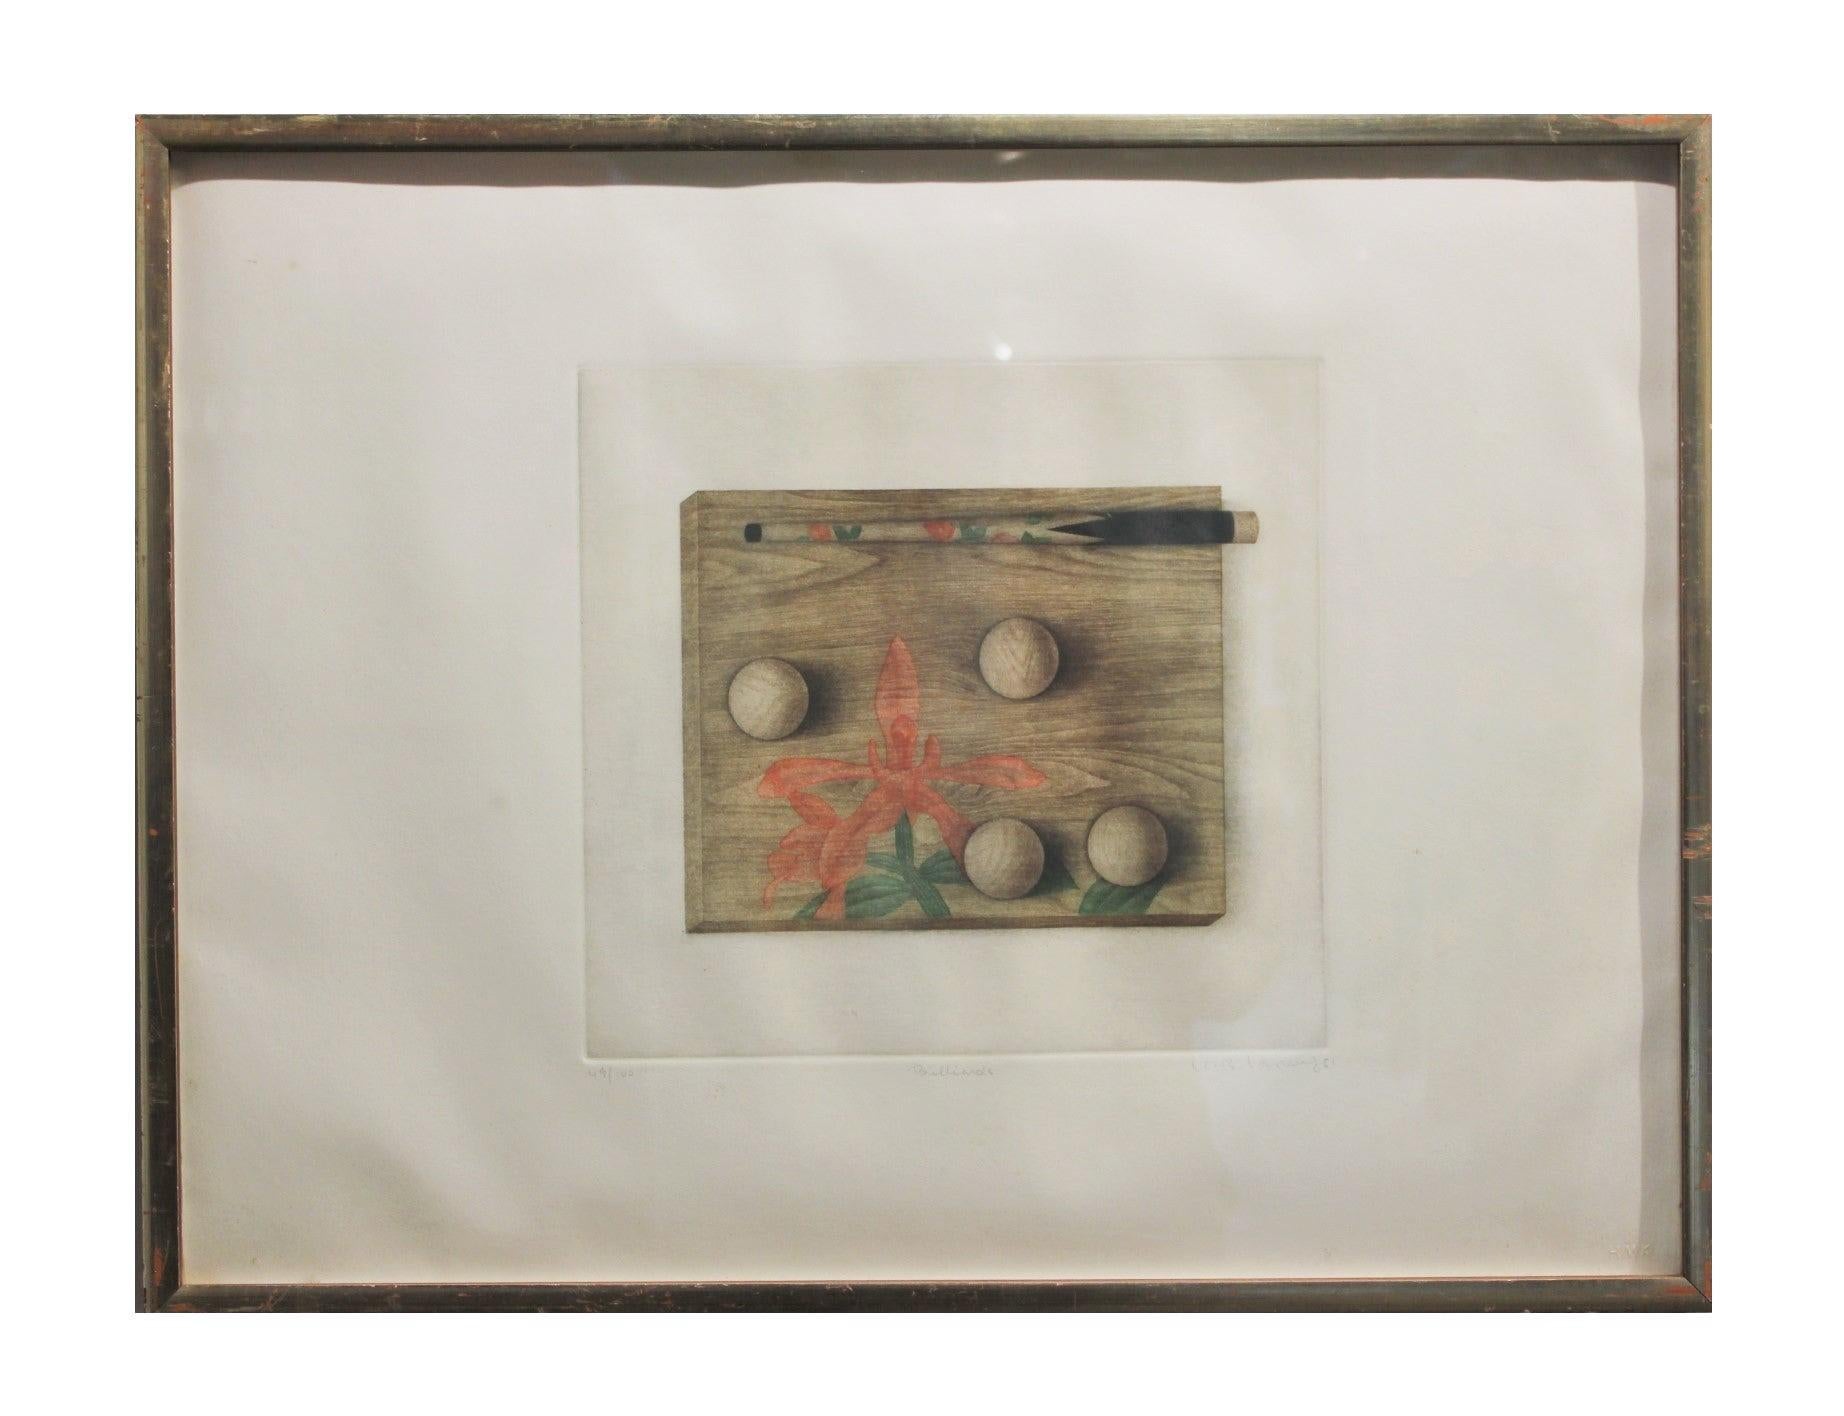 Unknown Abstract Print - "Billards" Surrealist Still Life with Flowers Edition 49 of 100